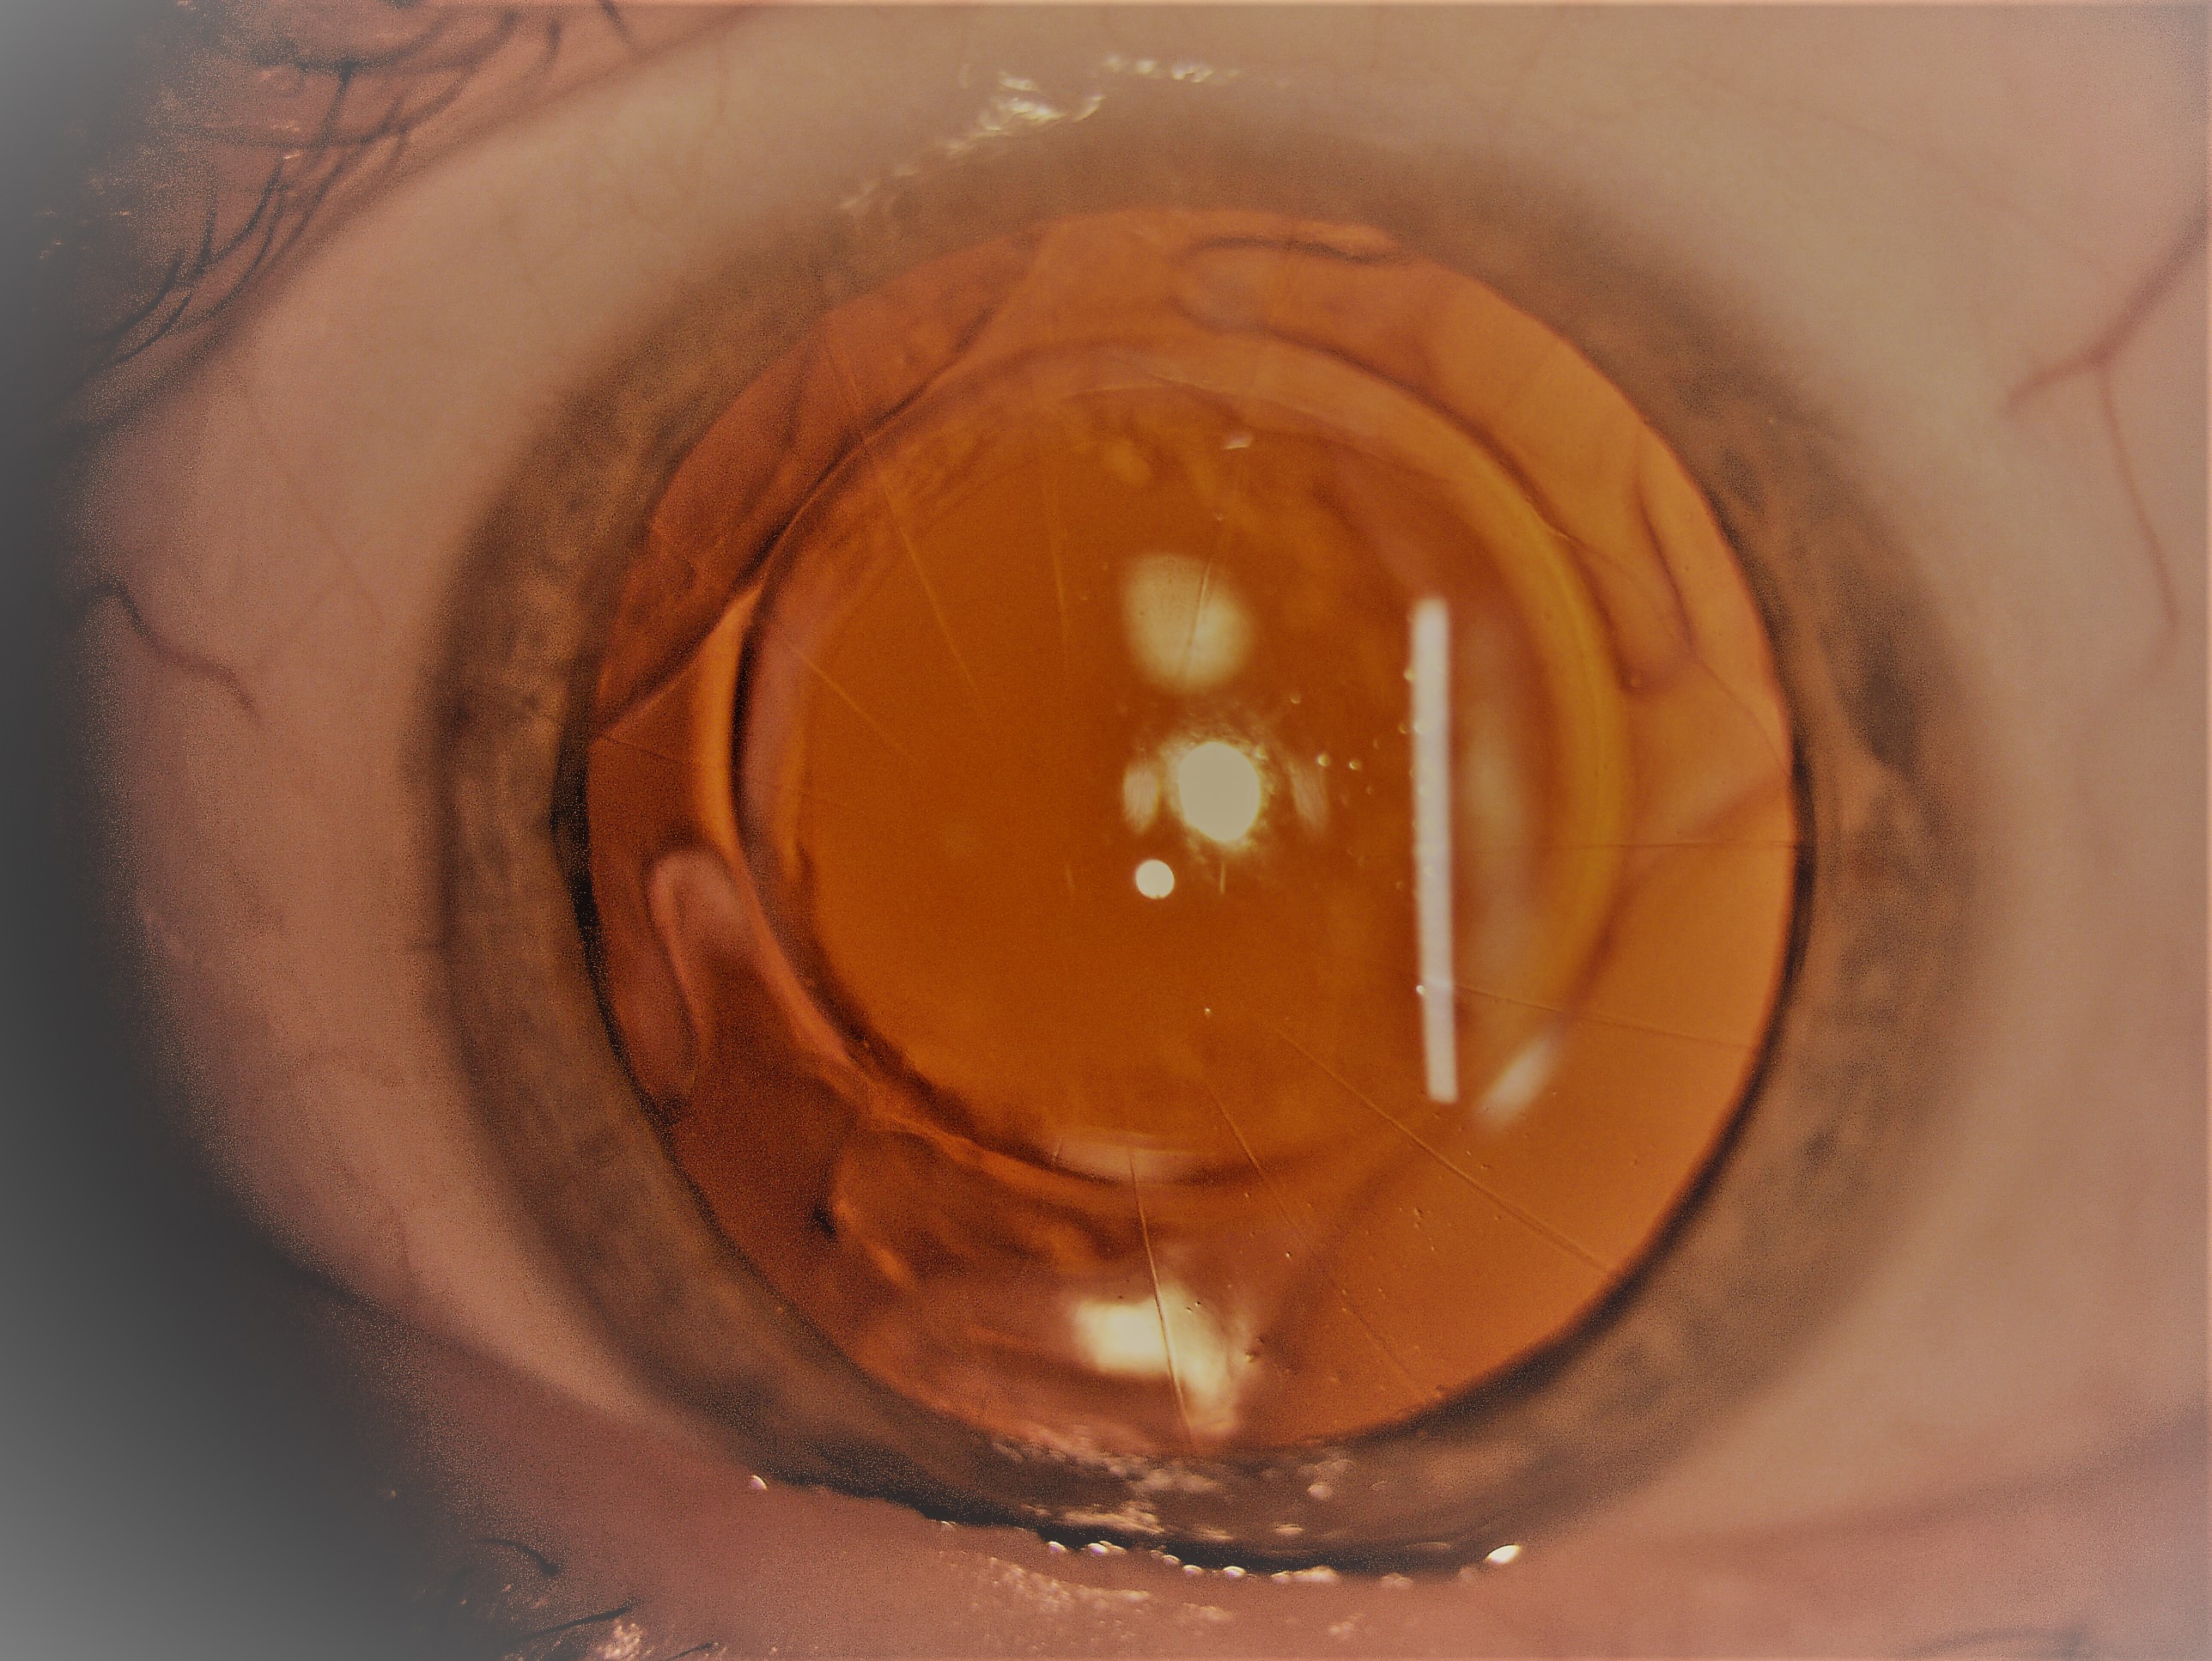 16-incision radial keratotomy in the left eye. The patient has had cataract surgery with implantation of an intraocular lens decades after the primary RK procedure.